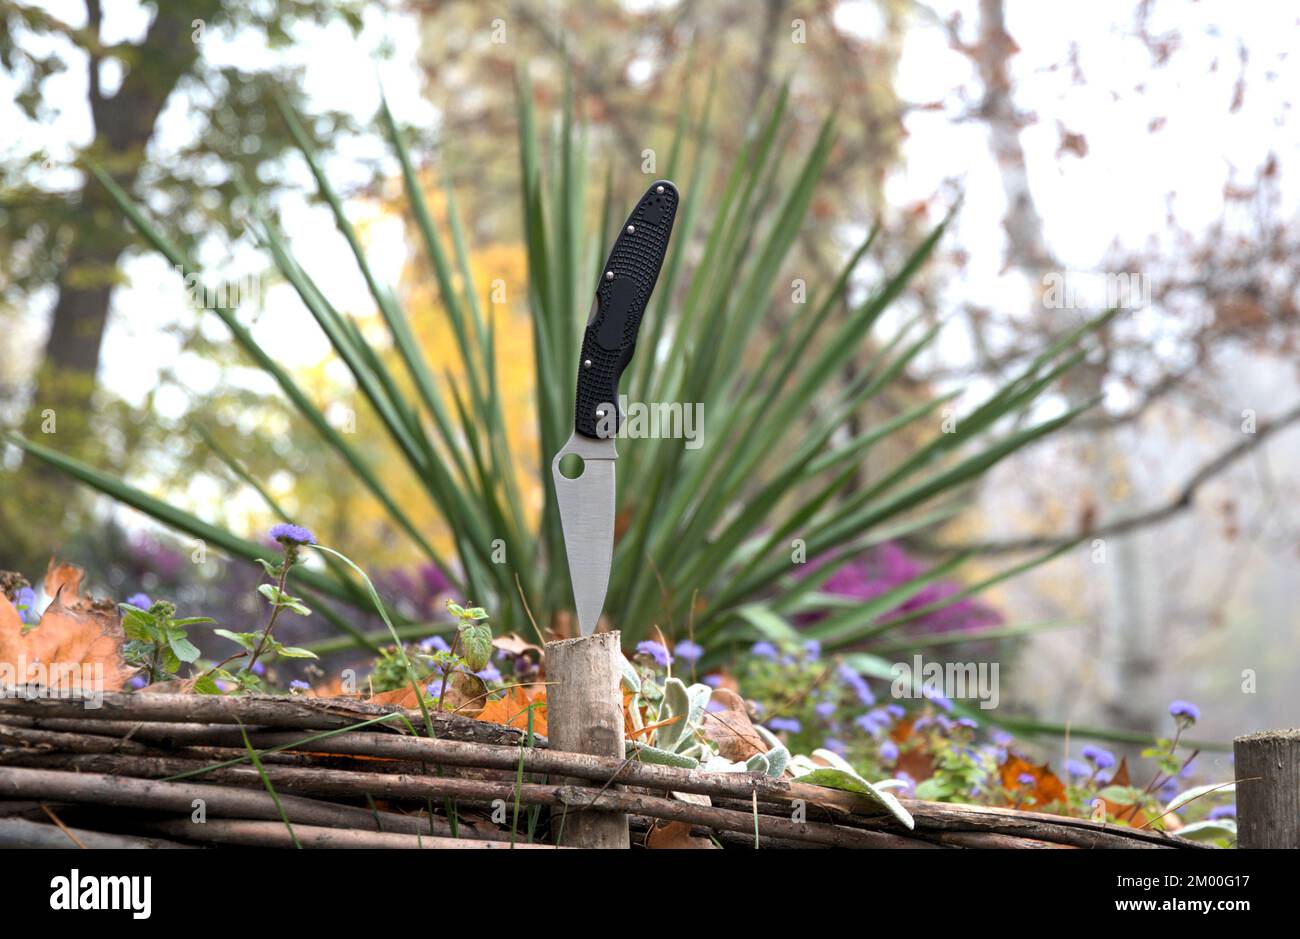 Folding knife gray cutting stainless blade black handle green grass blue flowers wood macro background Stock Photo